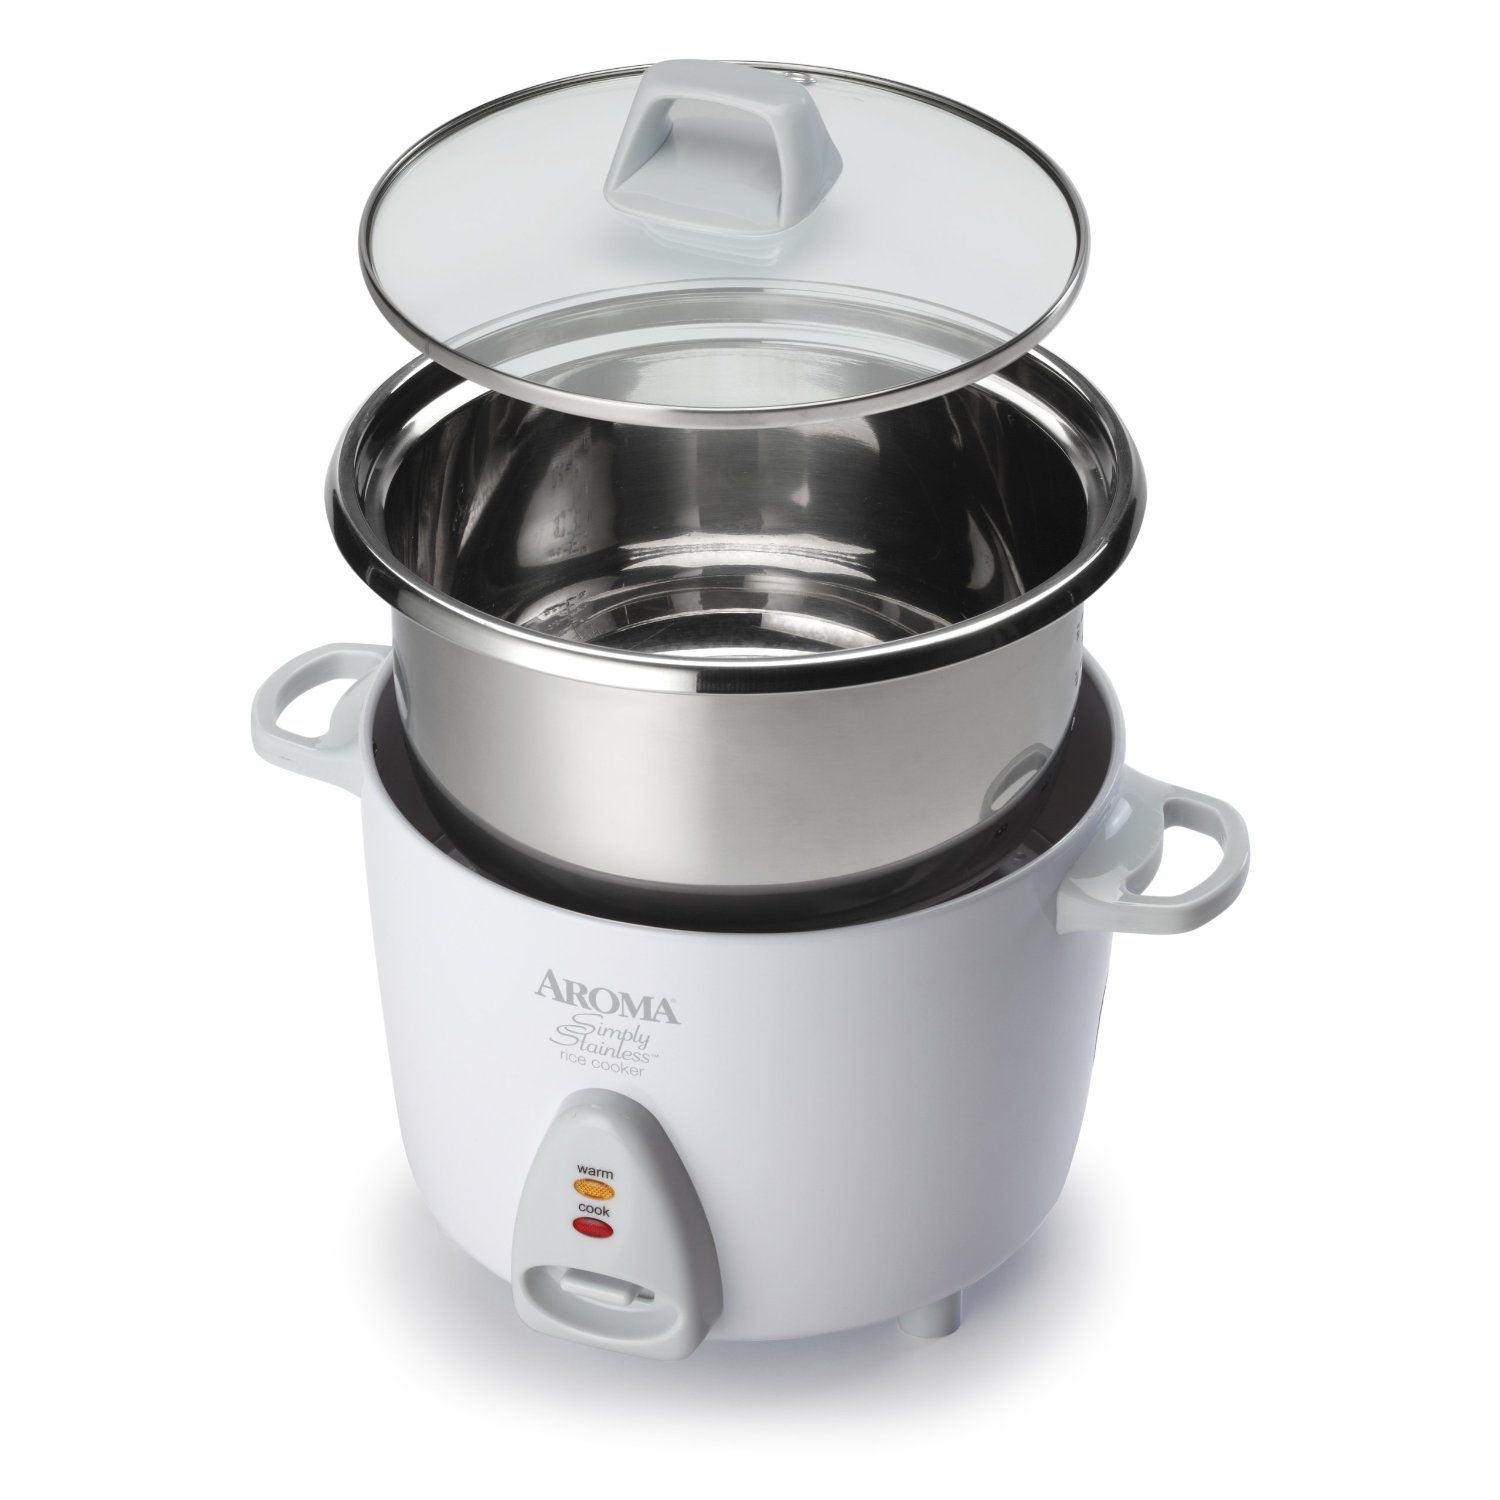 2 Cup Rice Cooker With Stainless Steel Inner Pot